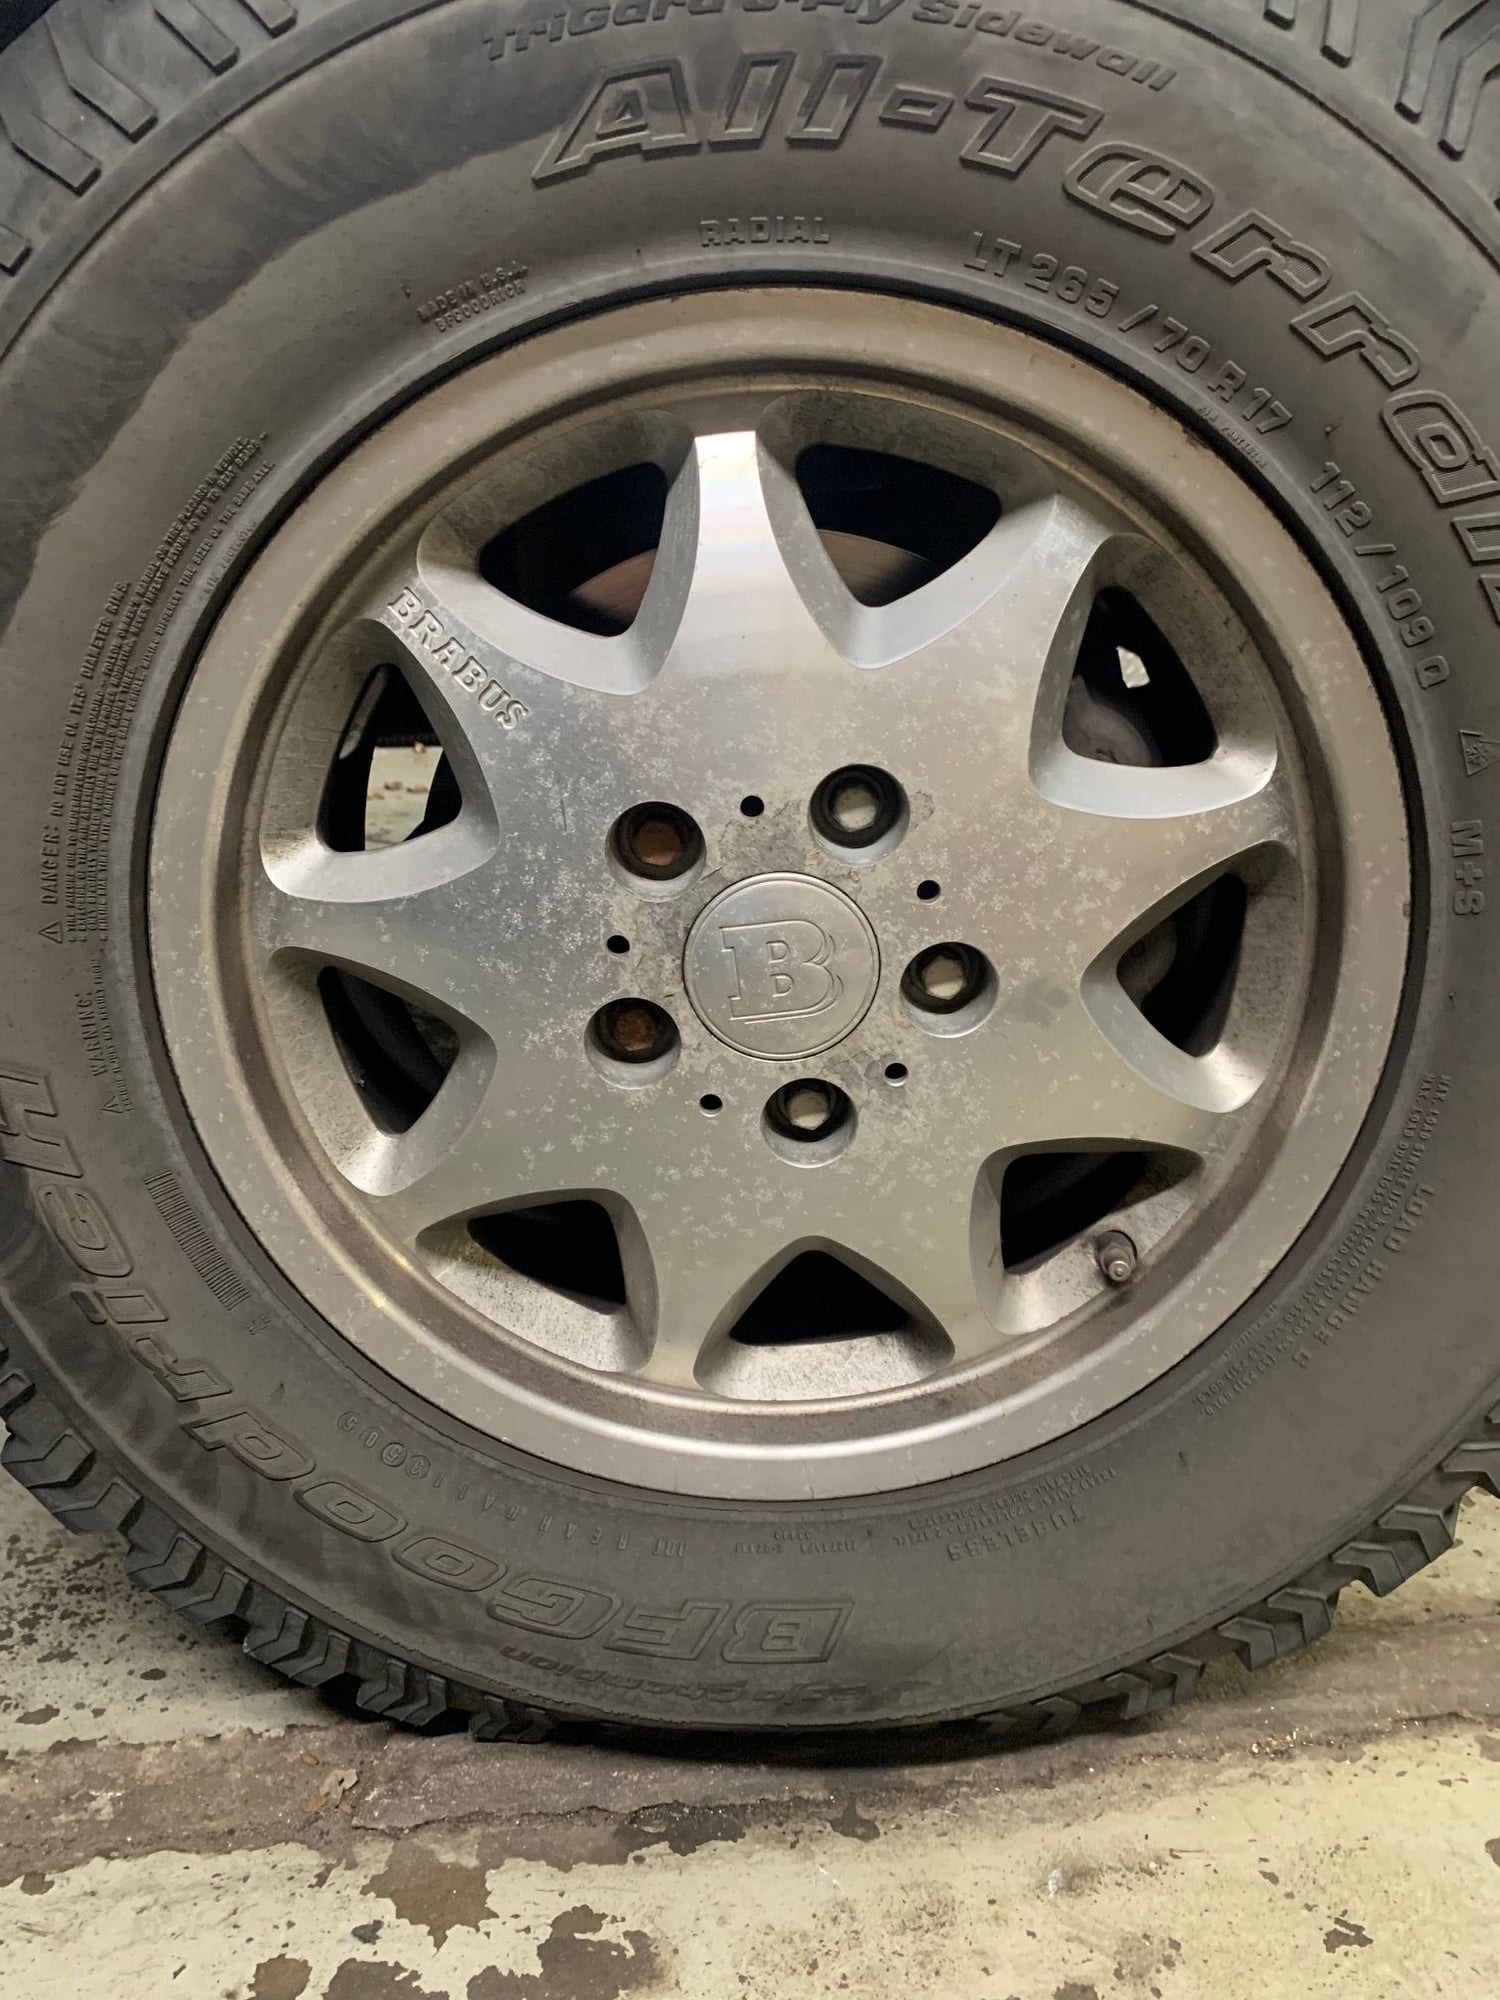 Wheels and Tires/Axles - BRABUS MONOBLOCK 3 WHEELS(5) G460/463 CLASS. BF GOODRICH ALL TERRAIN TIRES ARE FRESH - Used - All Years Mercedes-Benz G500 - St Louis, MO 63117, United States